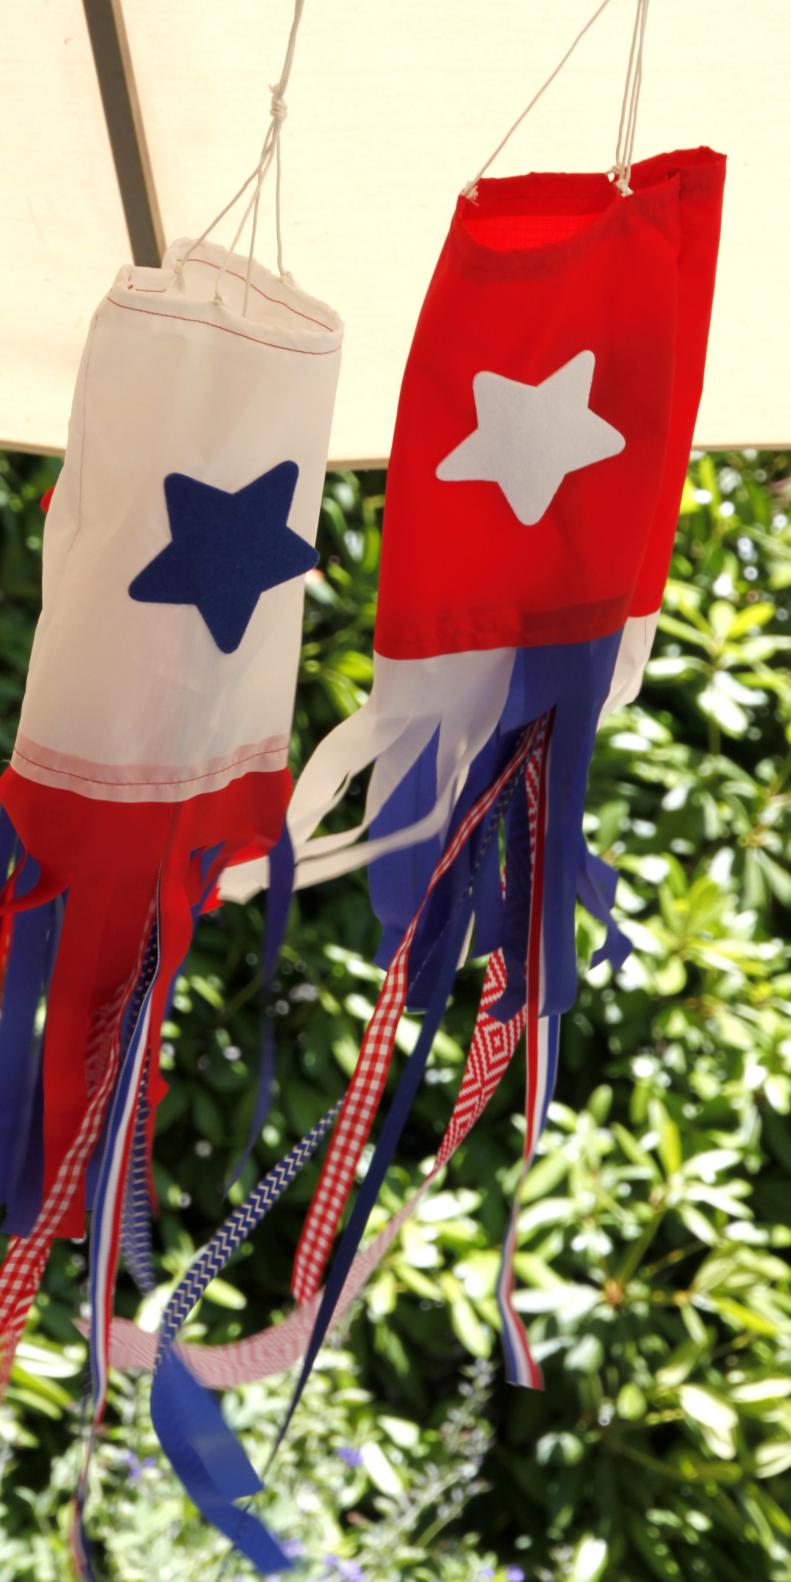 Learn how to make these firecracker windsocks for your July 4th celebration.